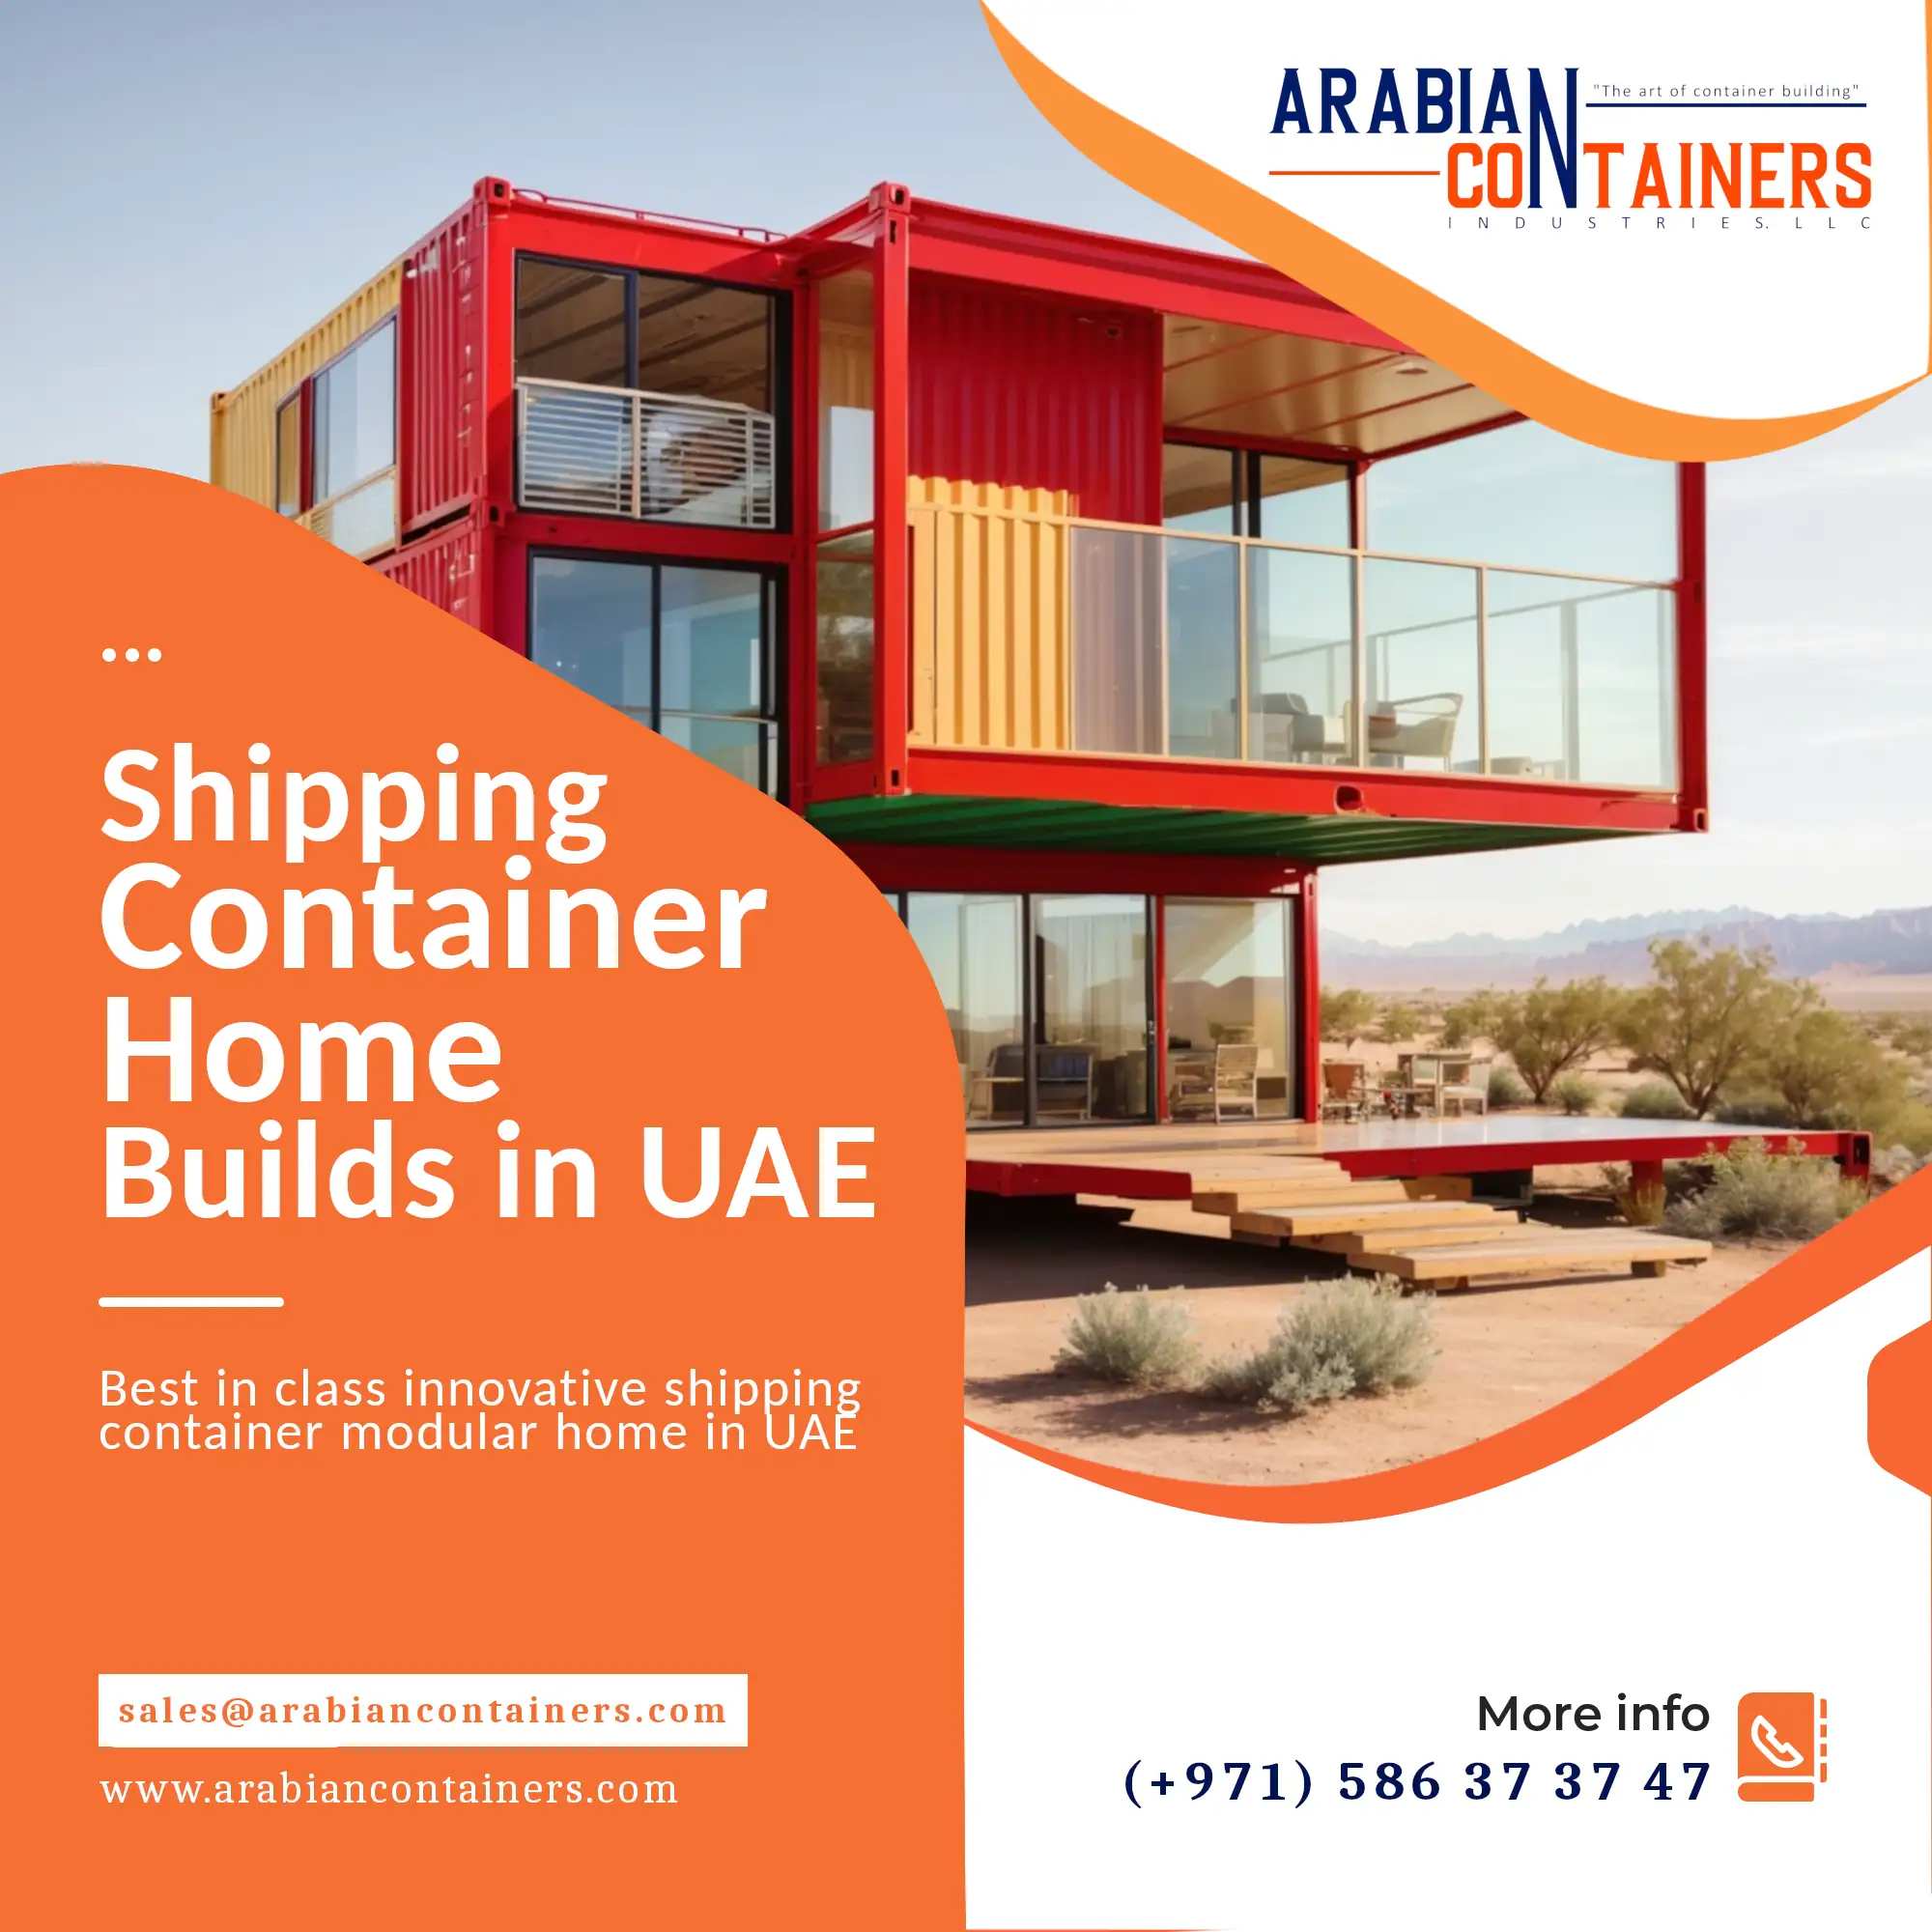 Shipping container home builder UAE.